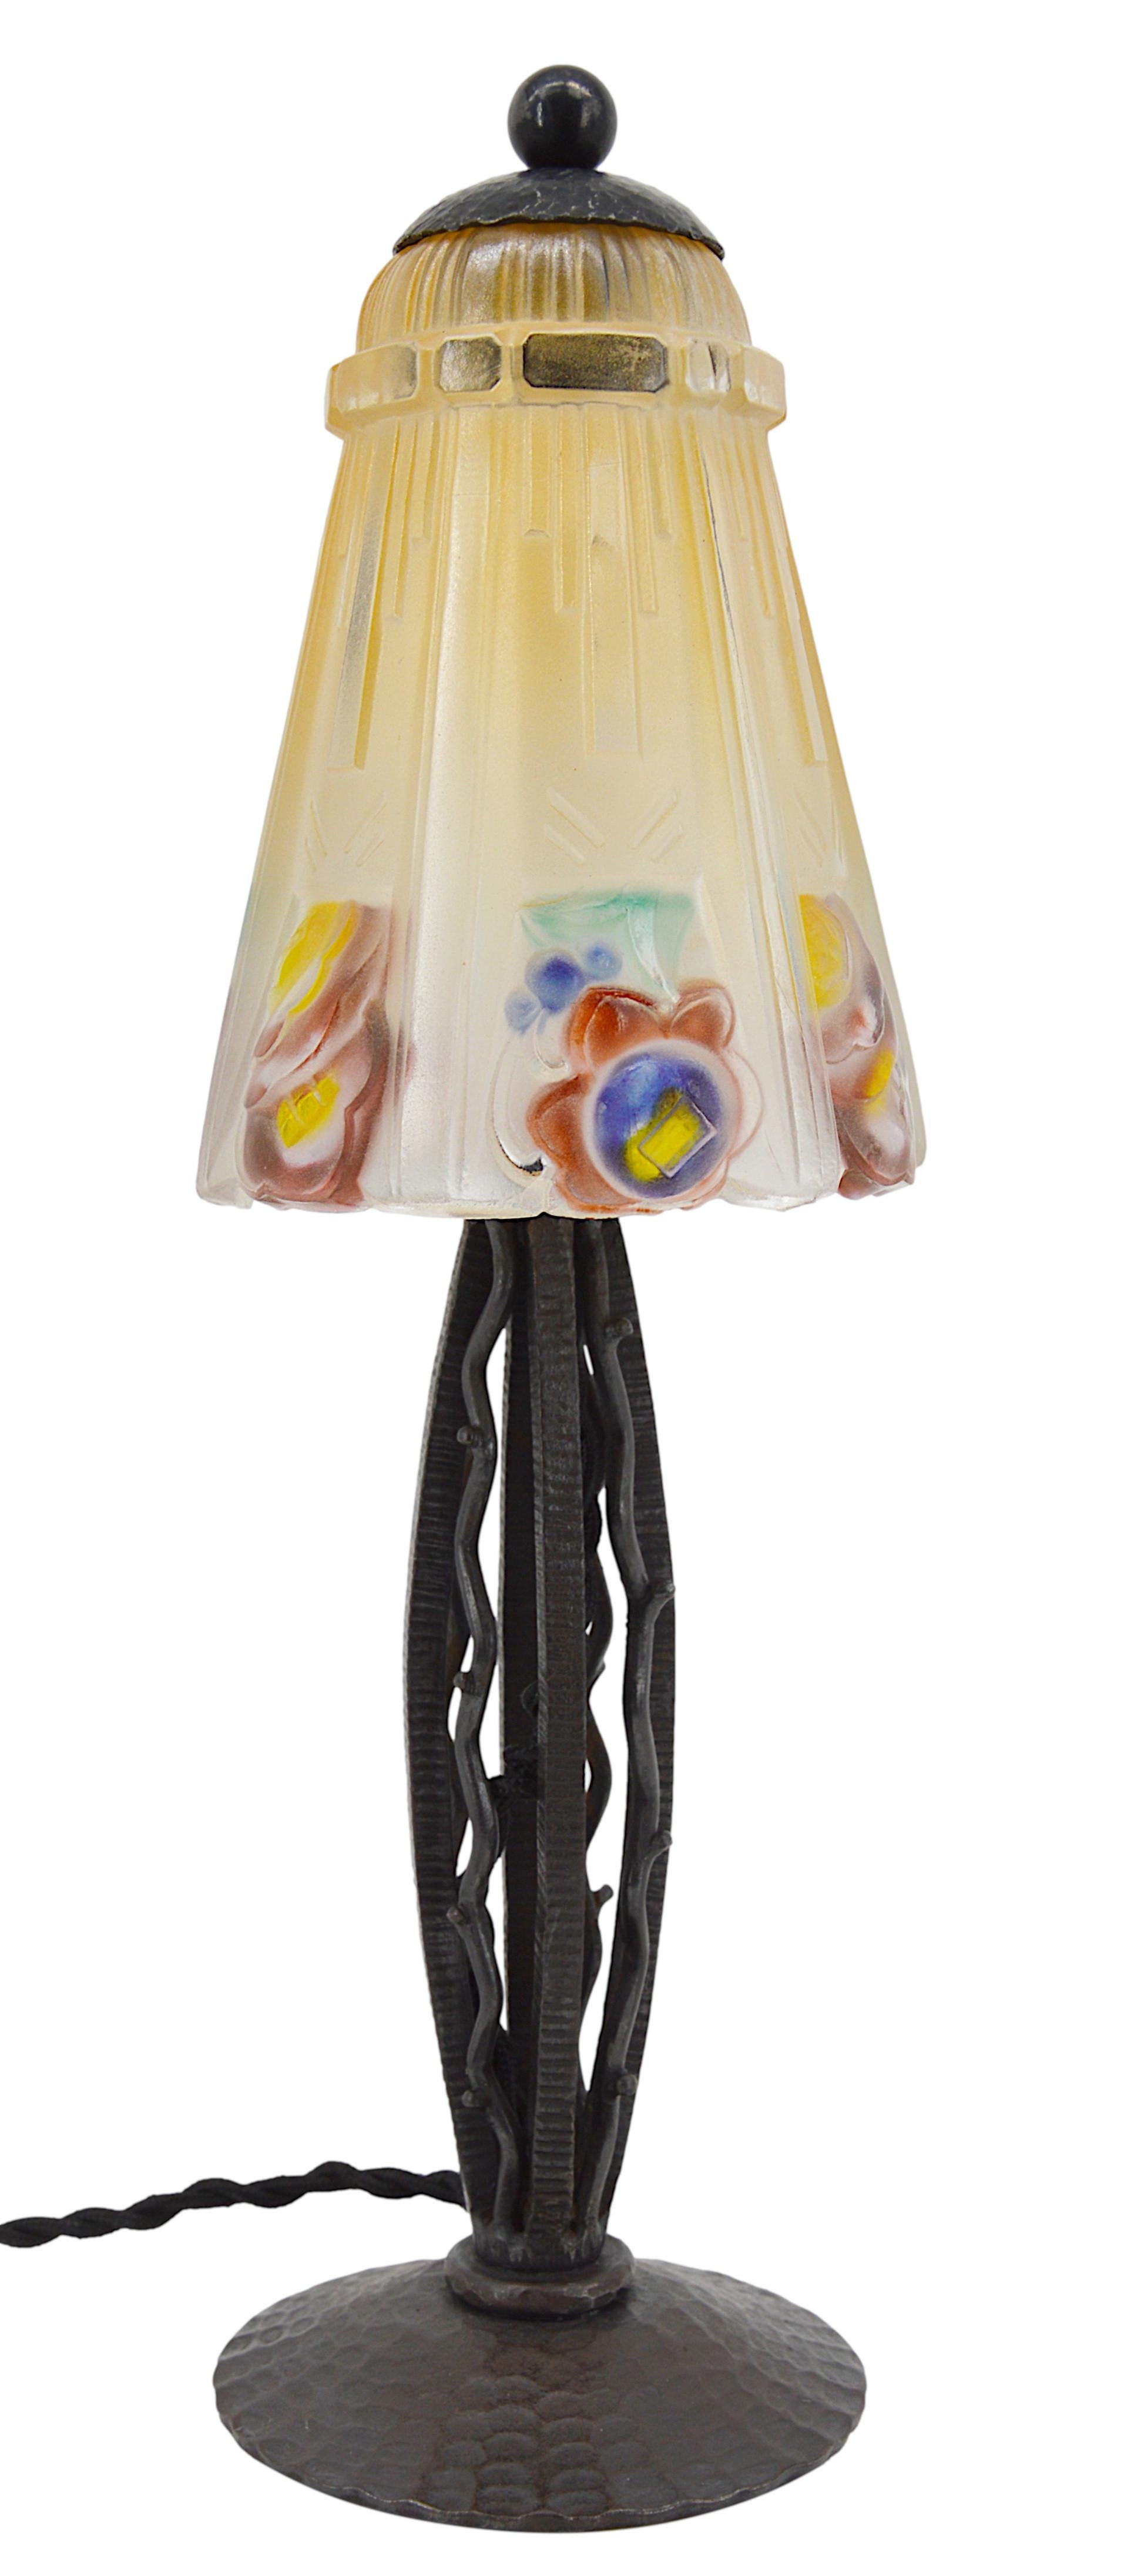 French Art Deco table lamp by Jean GAUTHIER (Paris), France, 1920s. Frosted glass shade with a floral pattern. Wrought-iron base. Same period as Lalique, Sabino, Etling, ... Height: 13.4